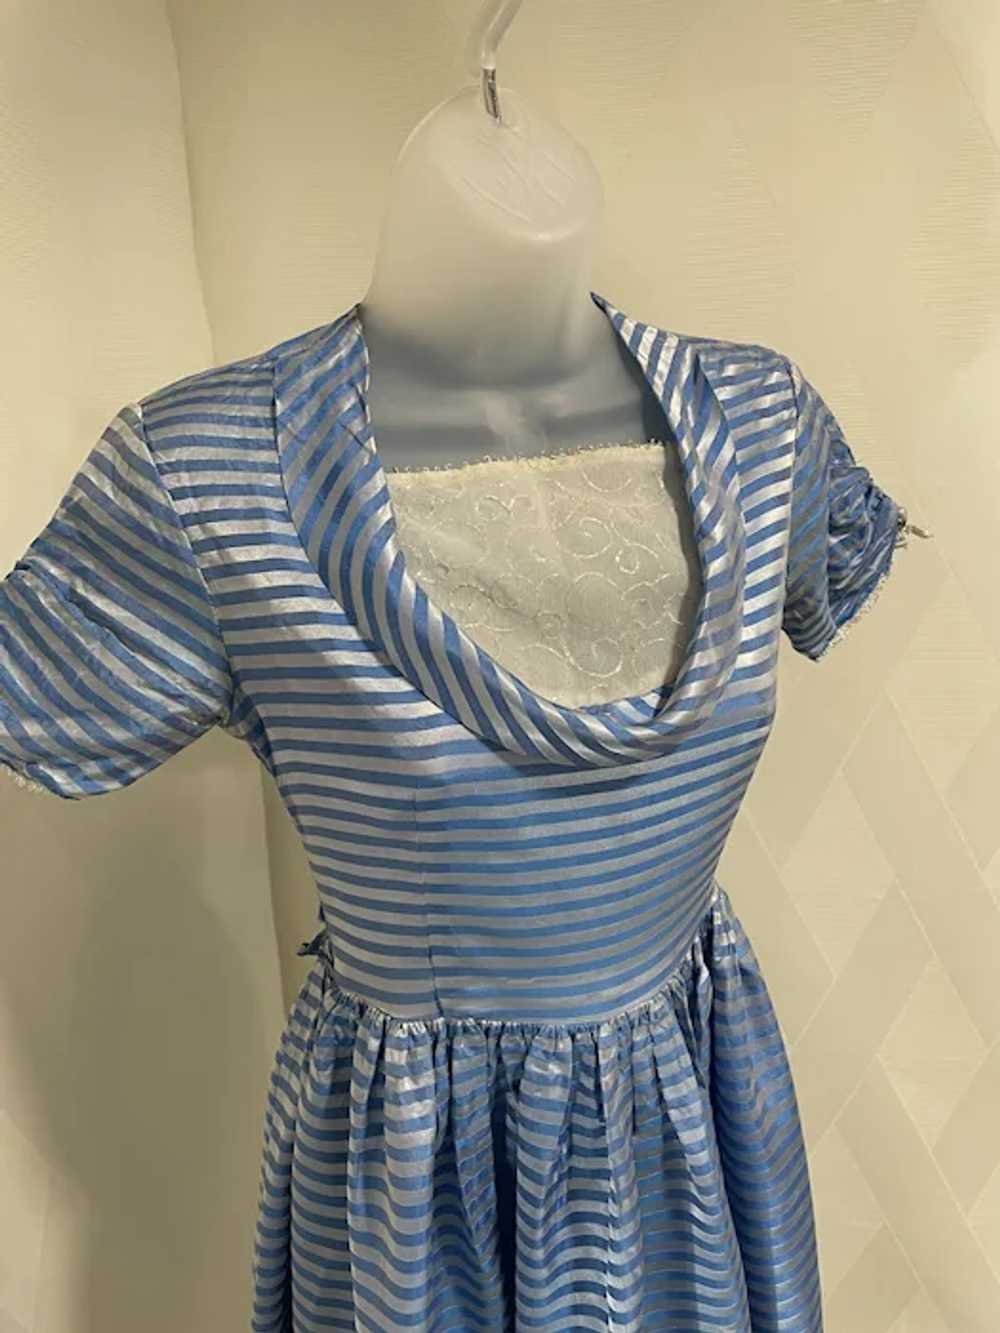 Vintage 1950s Blue and Silver Striped Dress - image 4